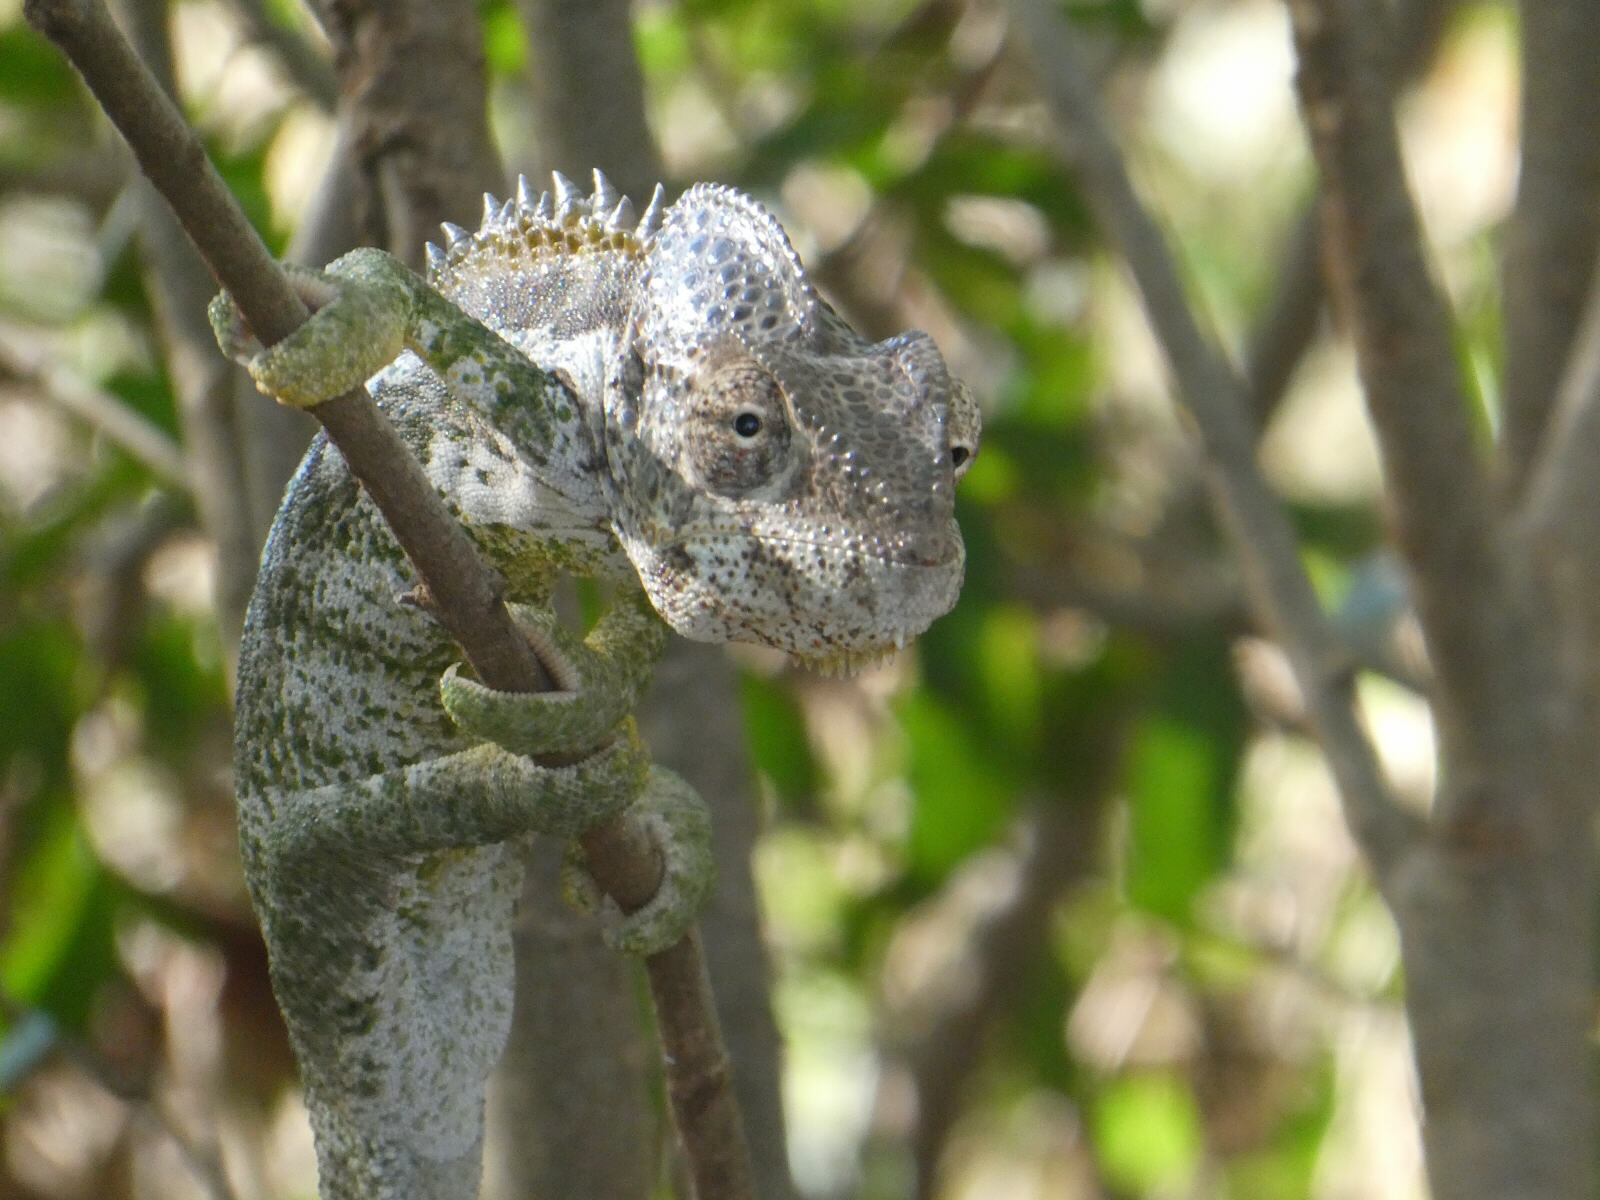 A warty chamelion at Berenty nature reserve, Madagascar